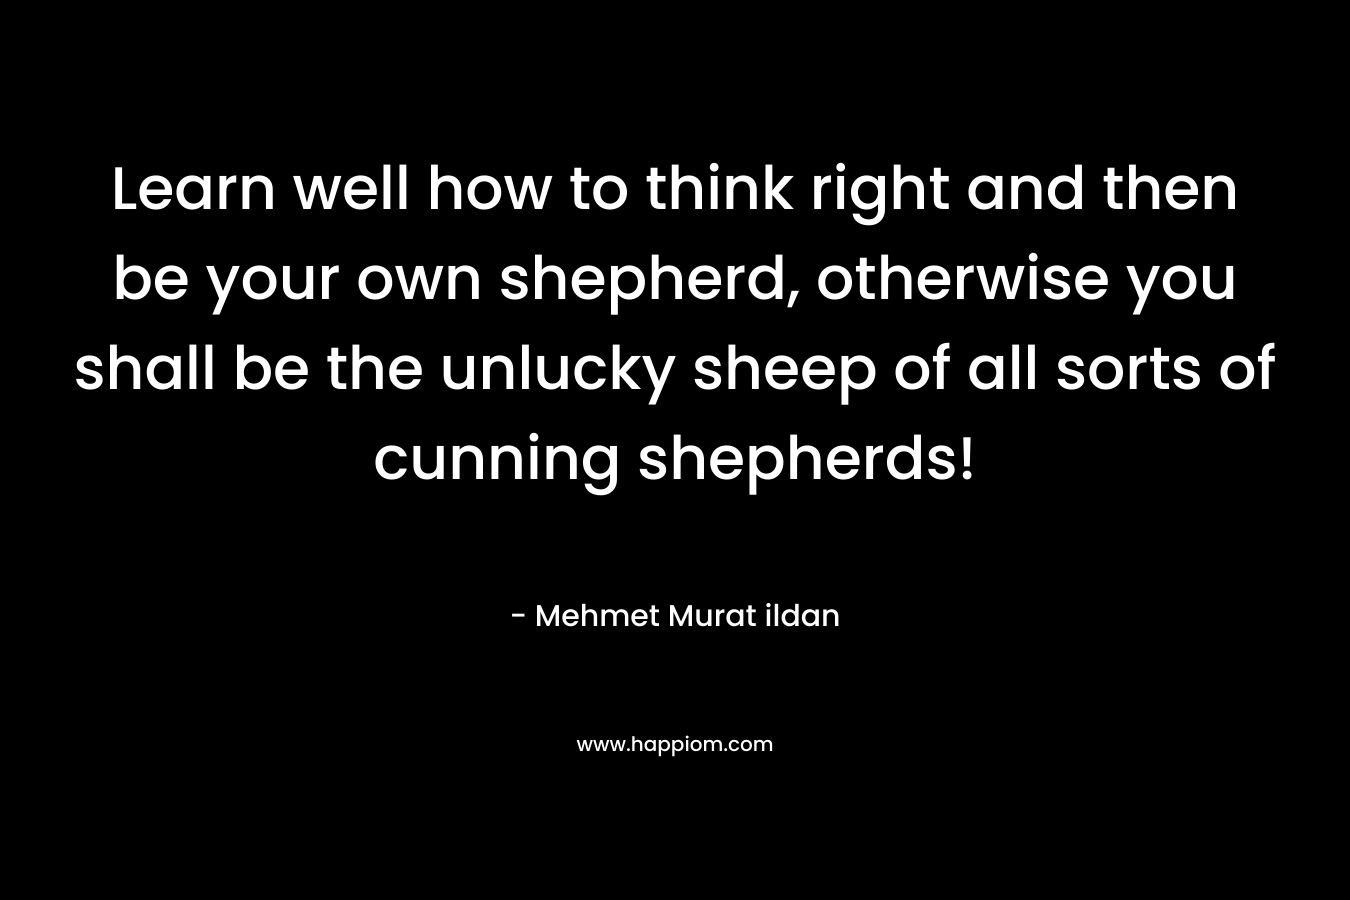 Learn well how to think right and then be your own shepherd, otherwise you shall be the unlucky sheep of all sorts of cunning shepherds! – Mehmet Murat ildan